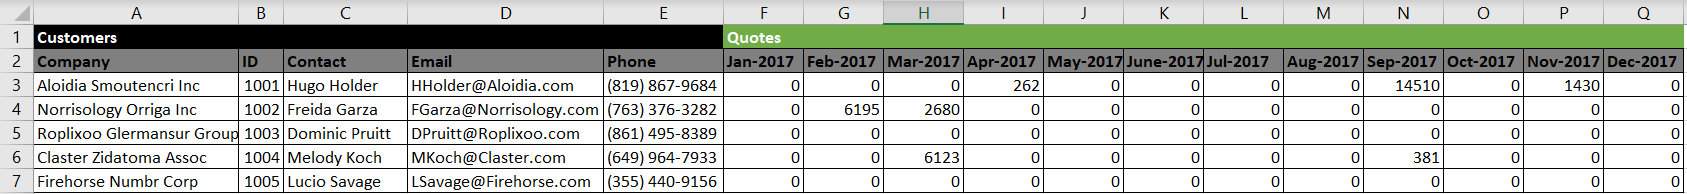 Excel Worksheet with Customers and Quotes data together as ONE big table in rows and columns.